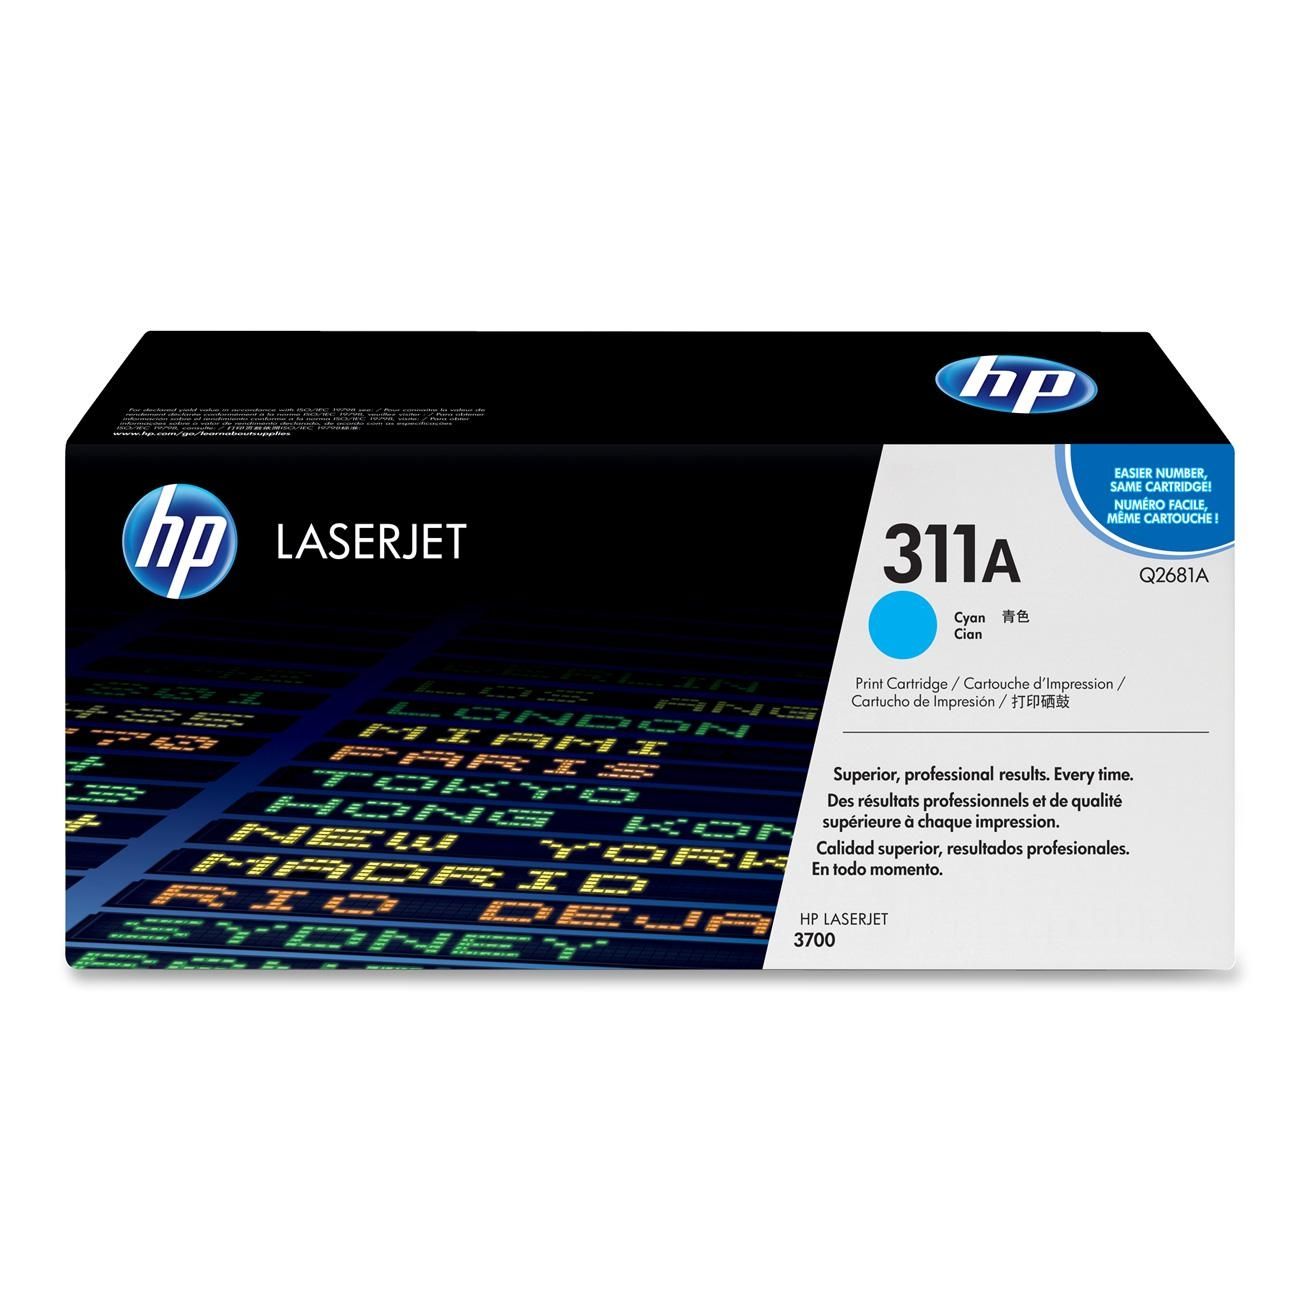 Related to HP 3700DTN: Q2681A